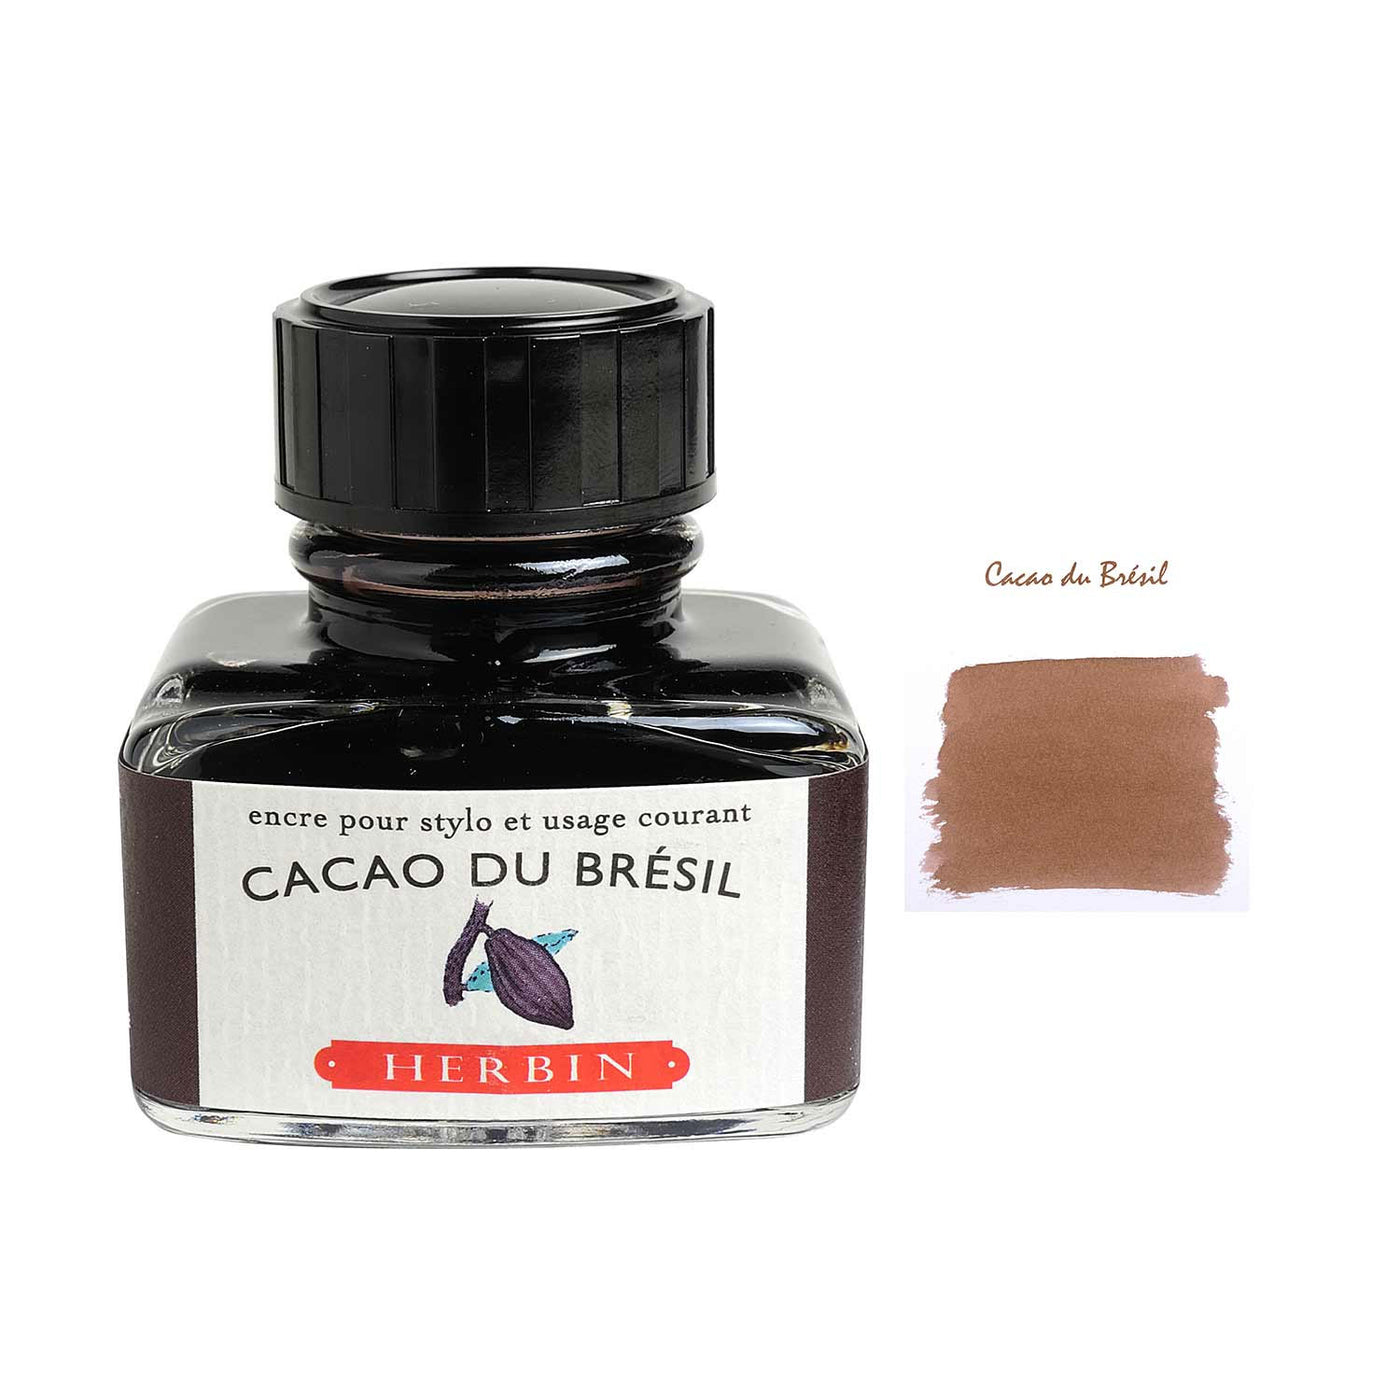 J Herbin "D" Series Ink Botle Cacao Du Bresil (Cocoa Brown) - 30ml 1